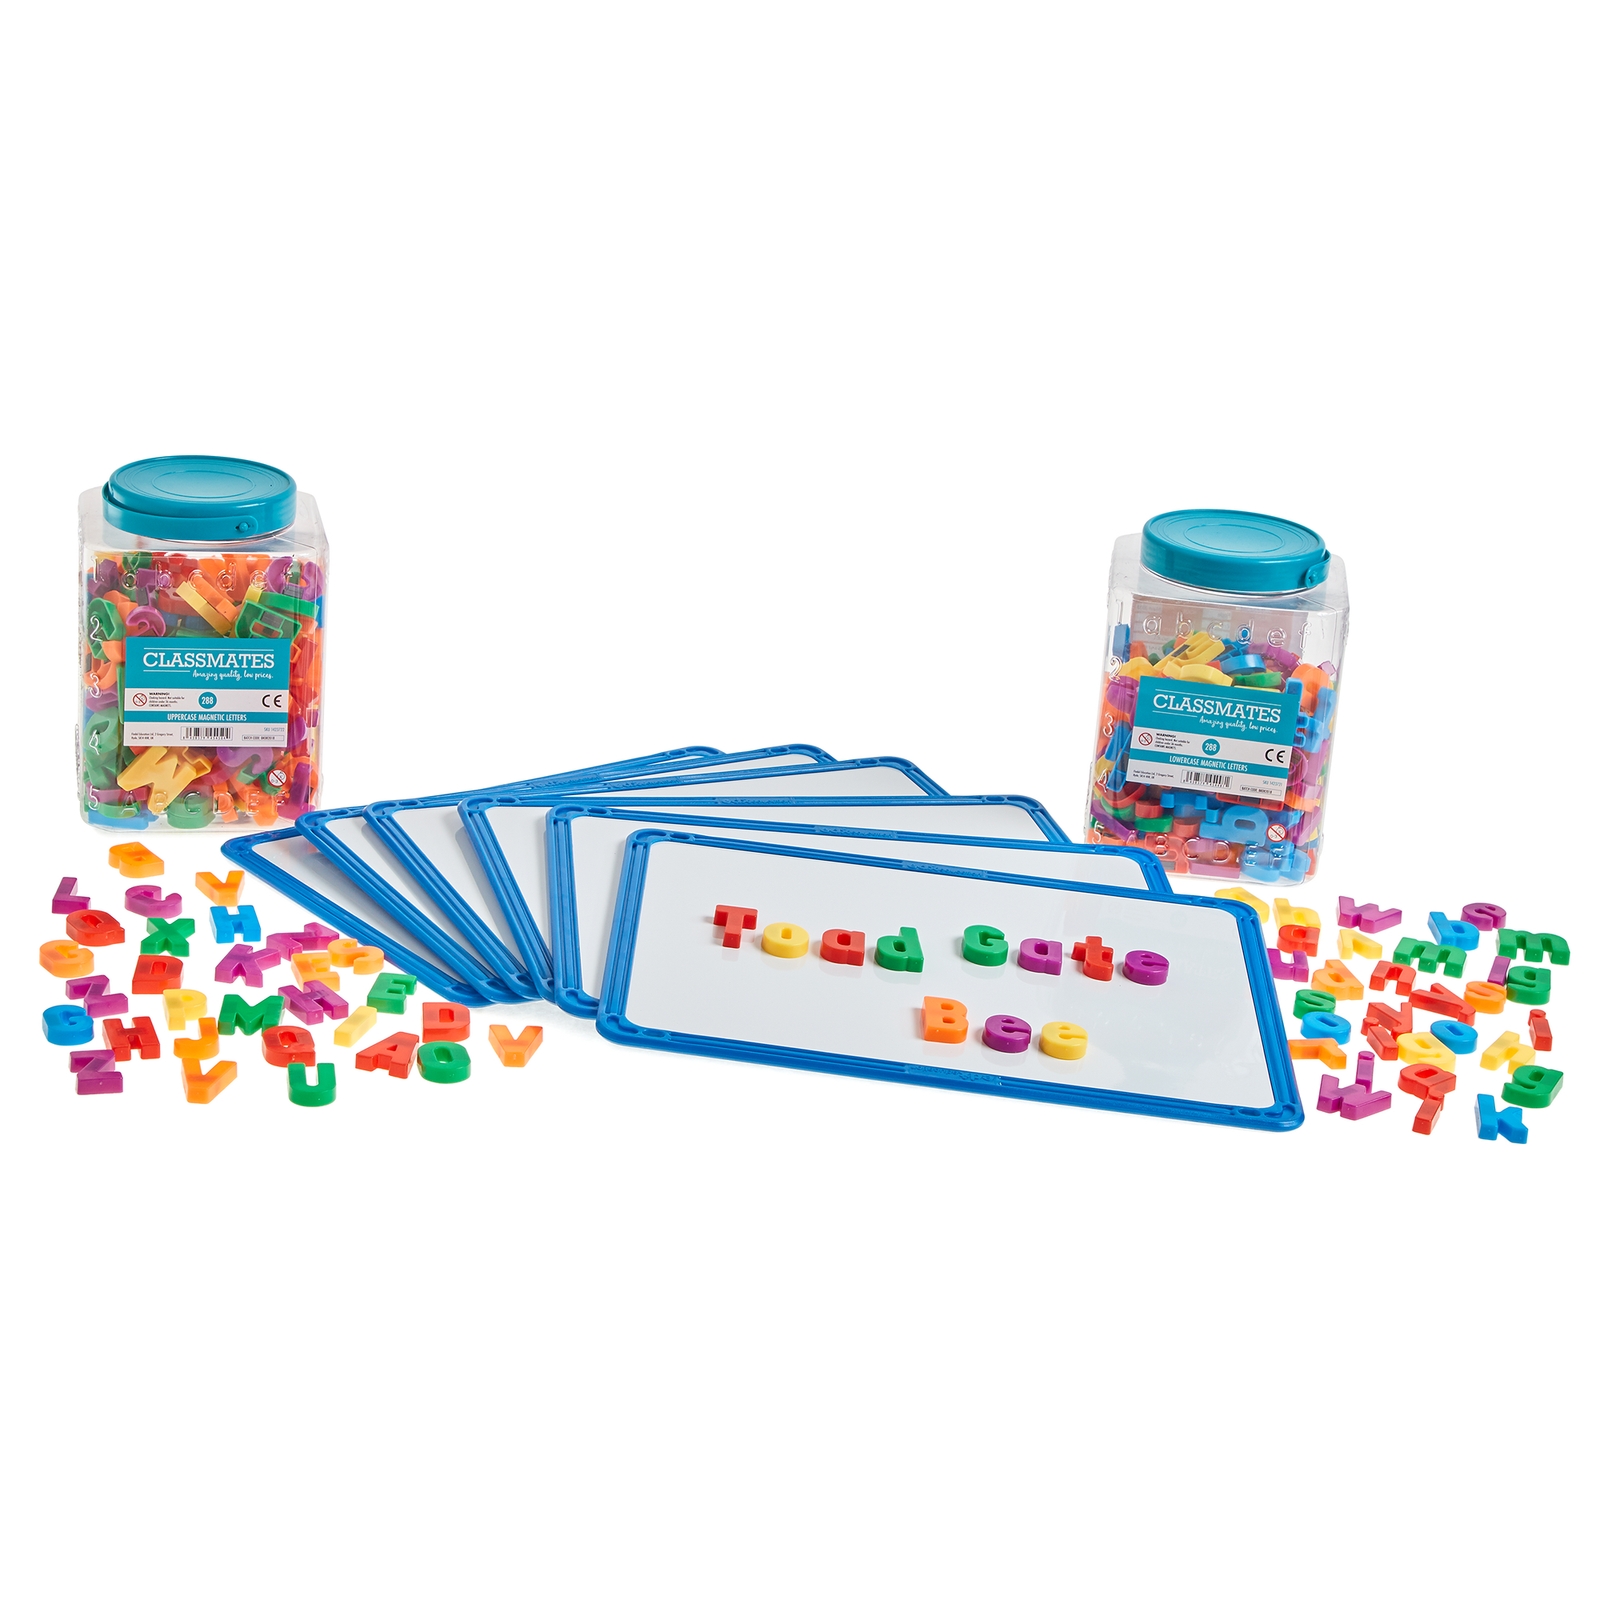 Magnetic Letters and Boards Multibuy Offer